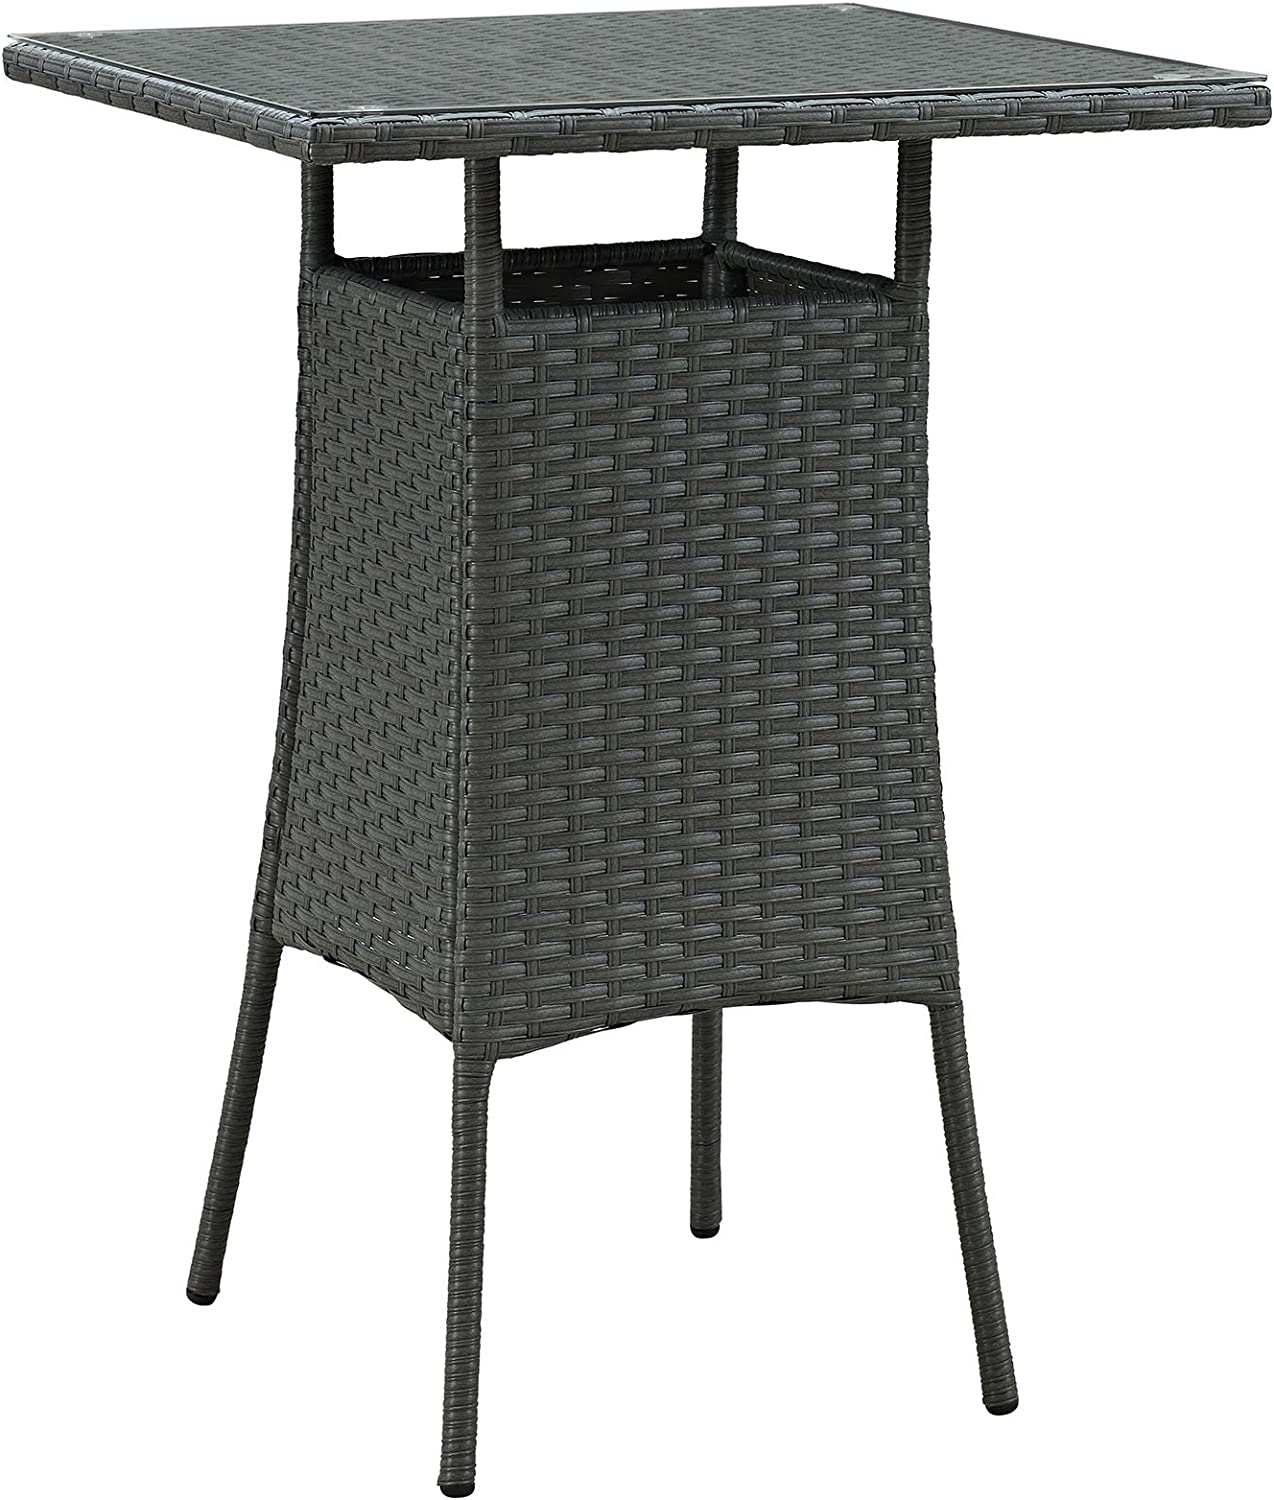 Modway Sojourn Wicker Rattan Outdoor Patio Square Bar Table in Chocolate